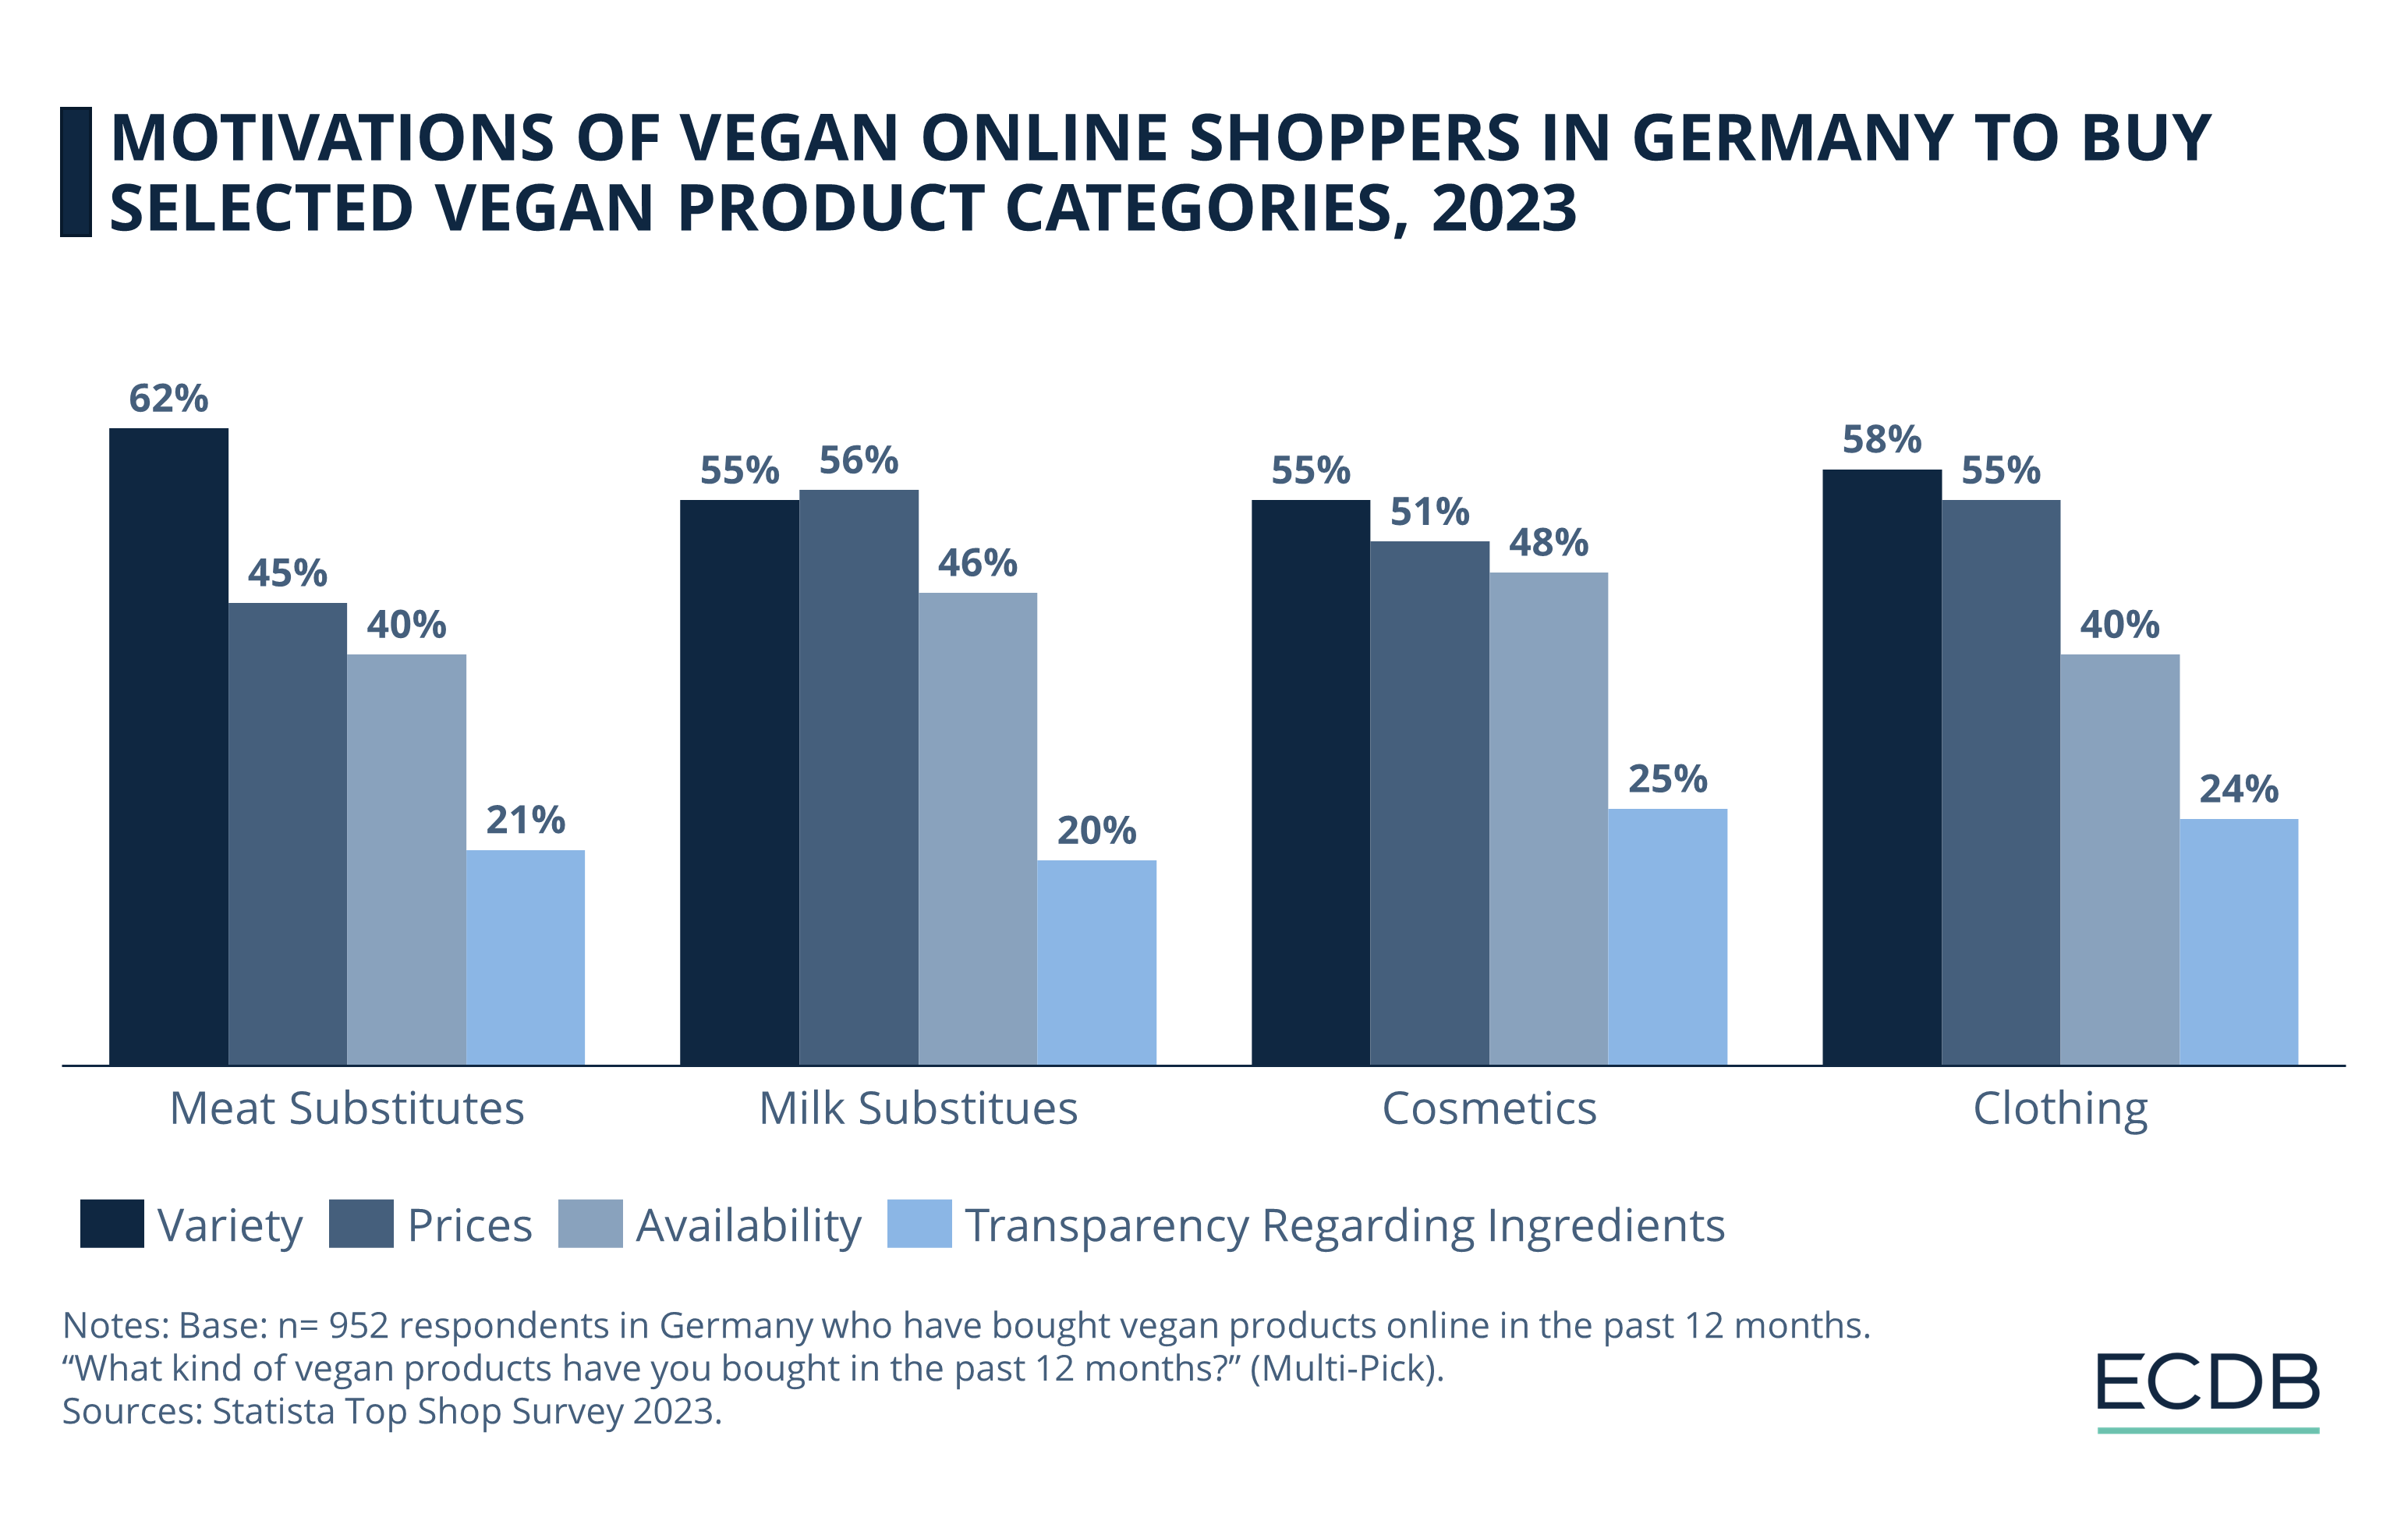 Motivations of Vegan Online Shoppers in Germany to Buy Selected Vegan Product Categories, 2023